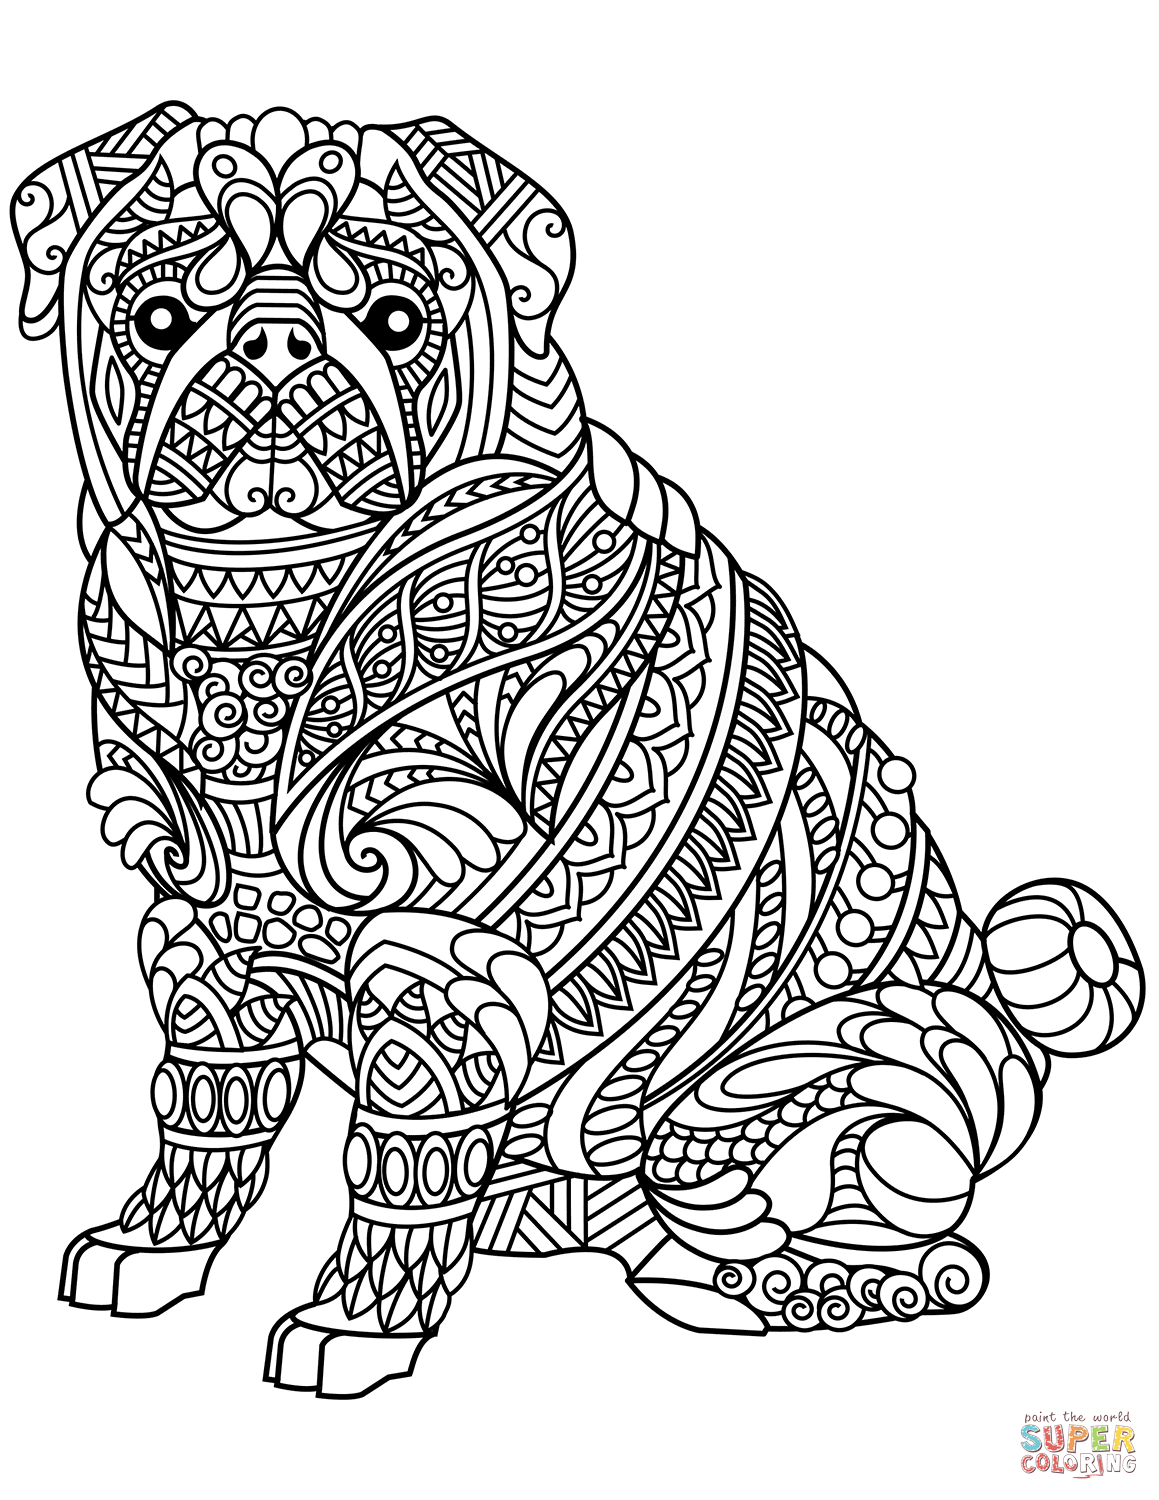 Pug Dog Zentangle coloring page | Free Printable Coloring Pages